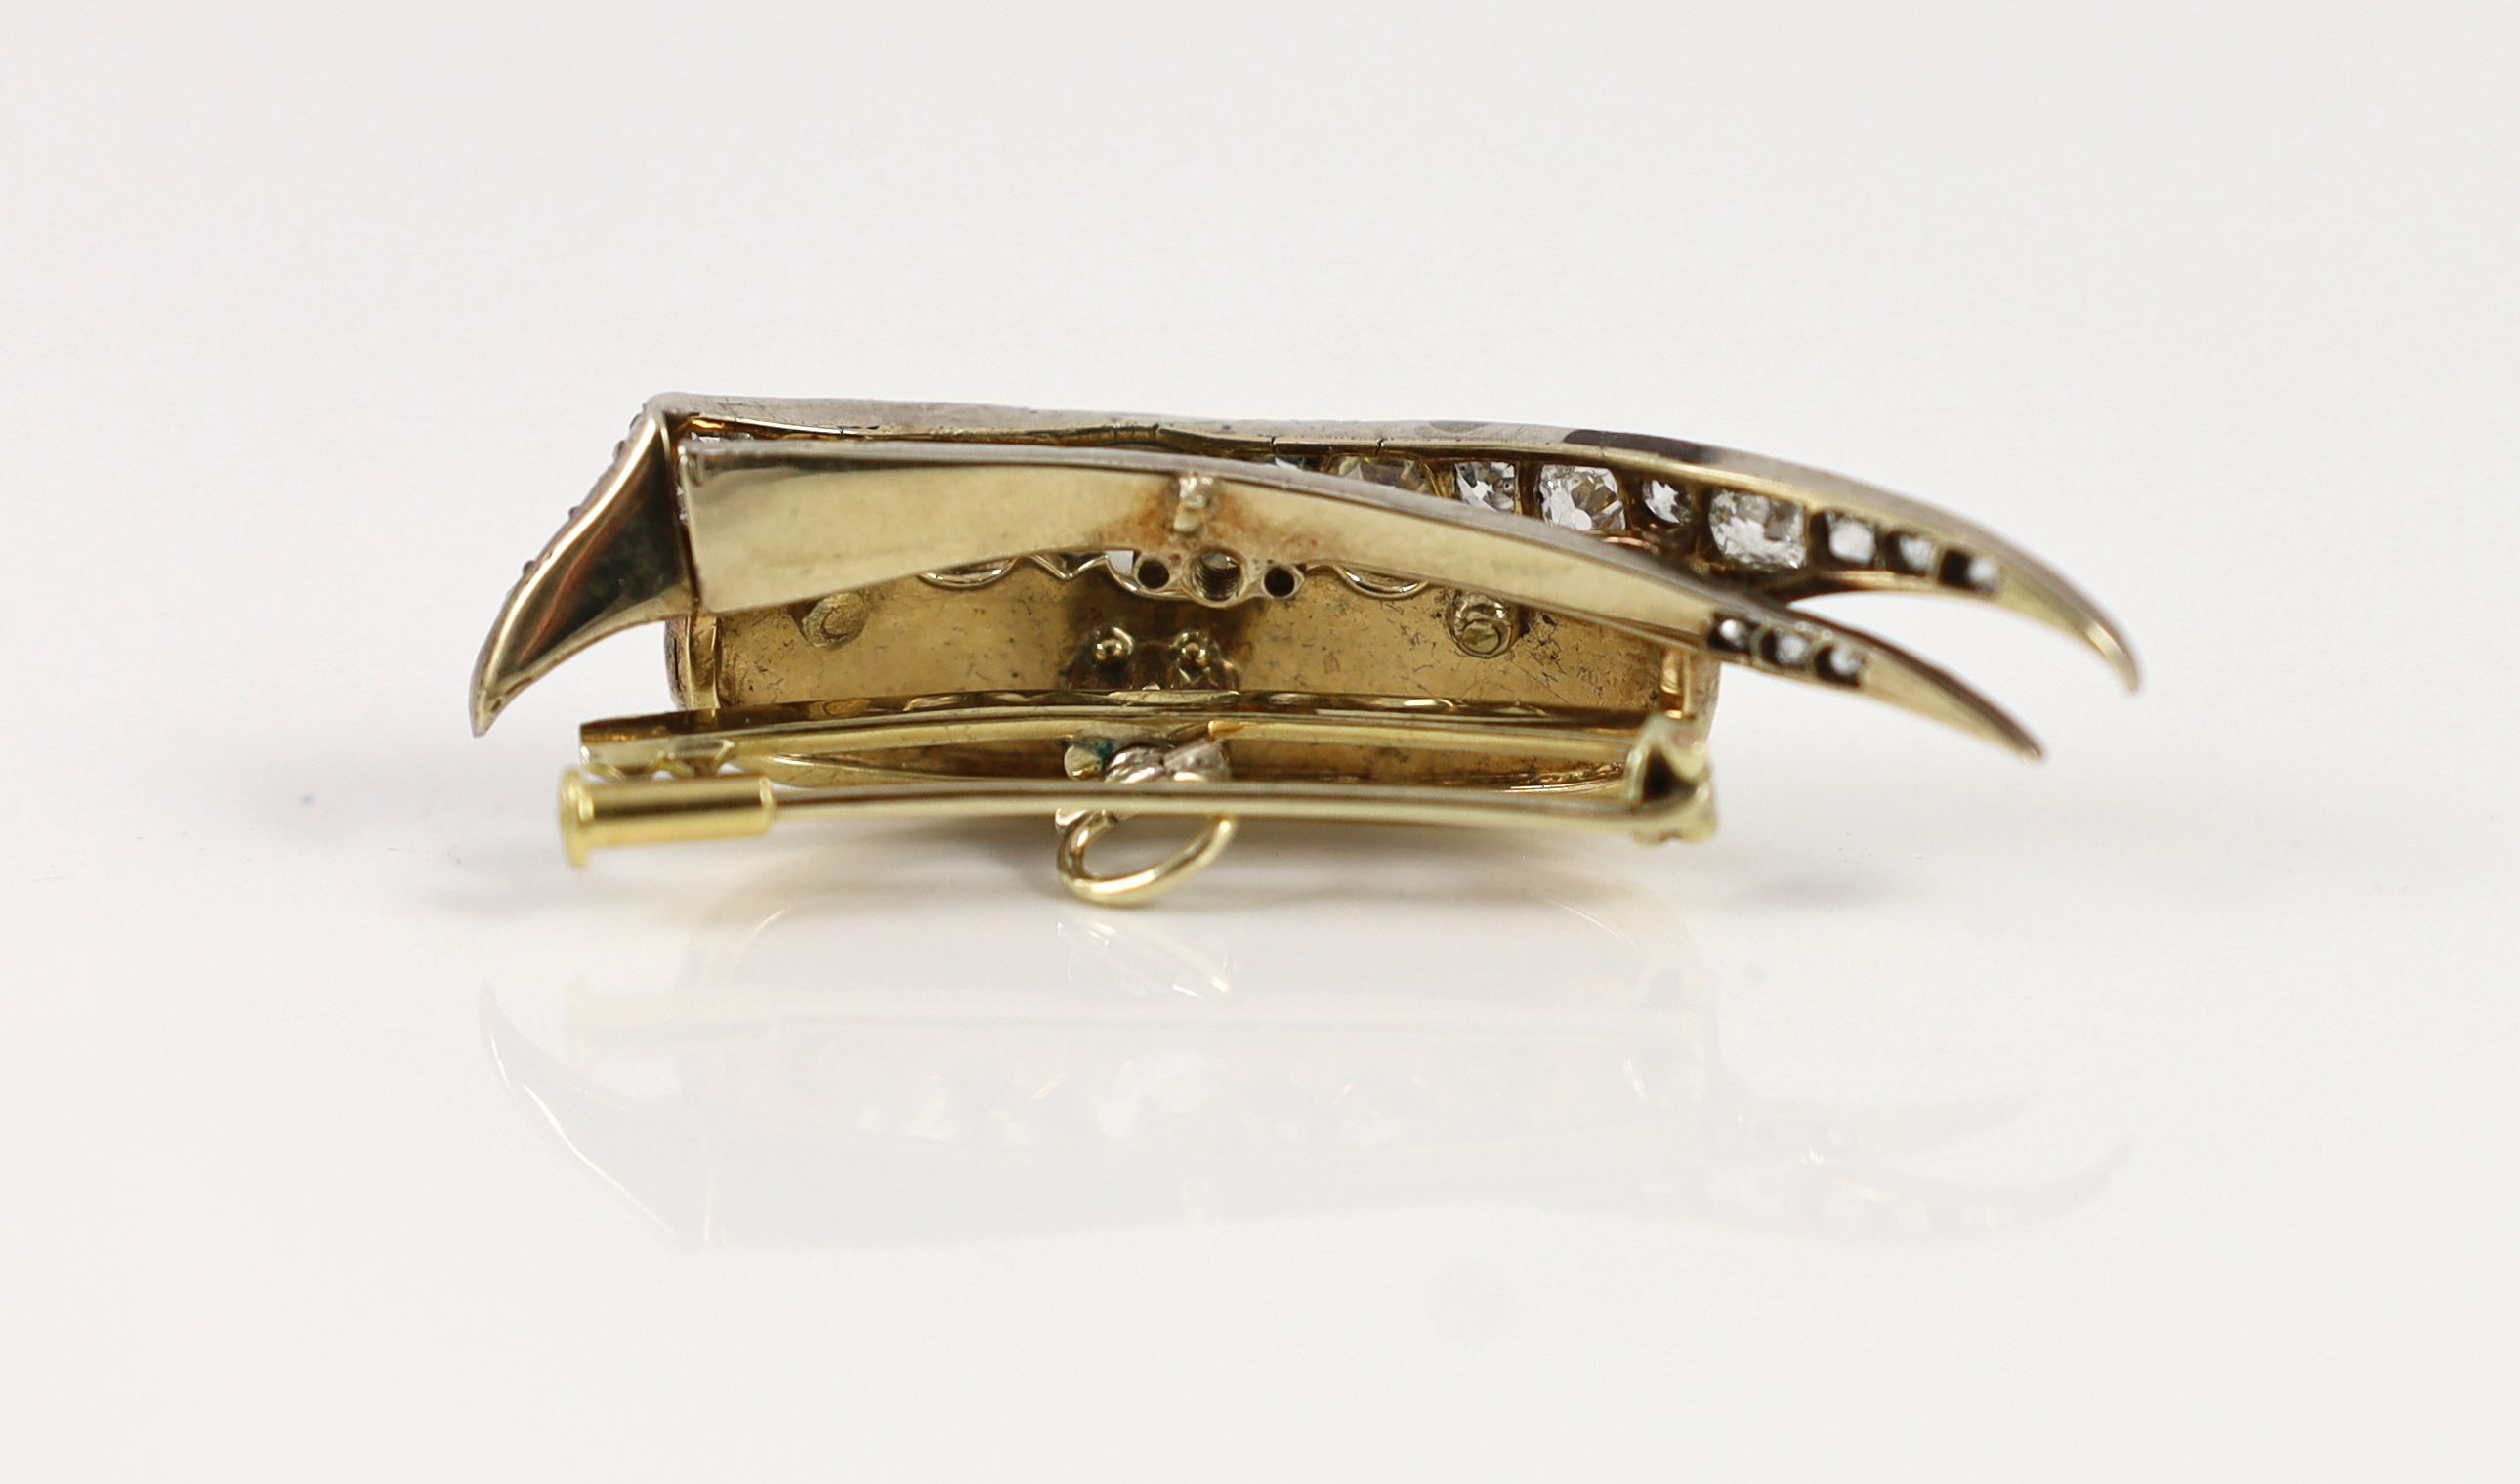 A Victorian gold and silver, diamond and split pearl set brooch, modelled as a 'chapeau gules turned up ermine' or heraldic cap of maintenance